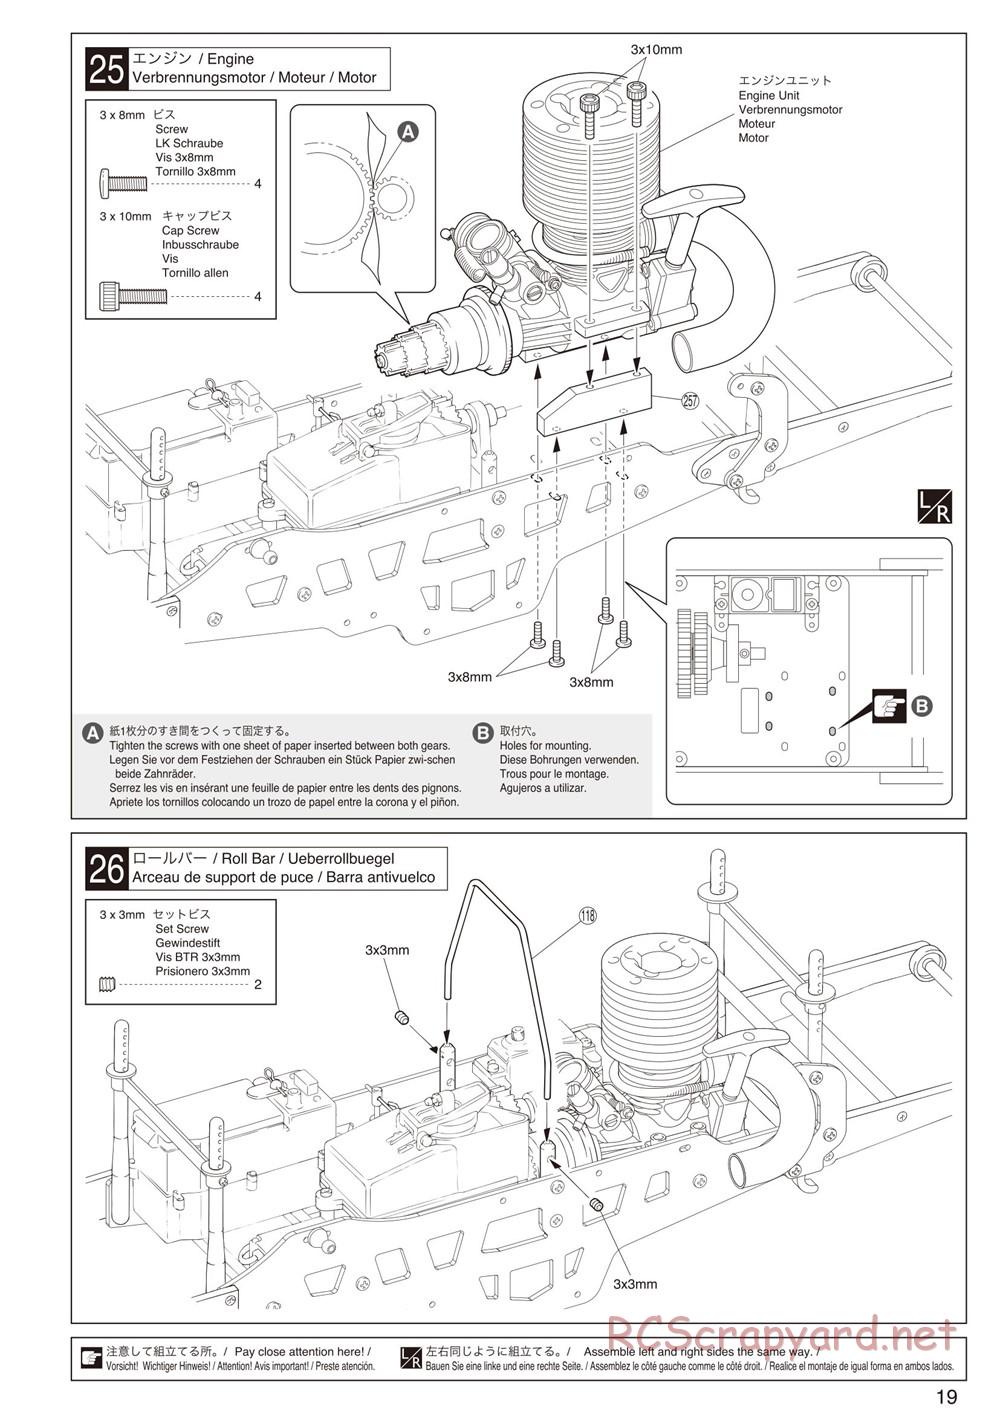 Kyosho - Mad Force Cruiser - Manual - Page 19